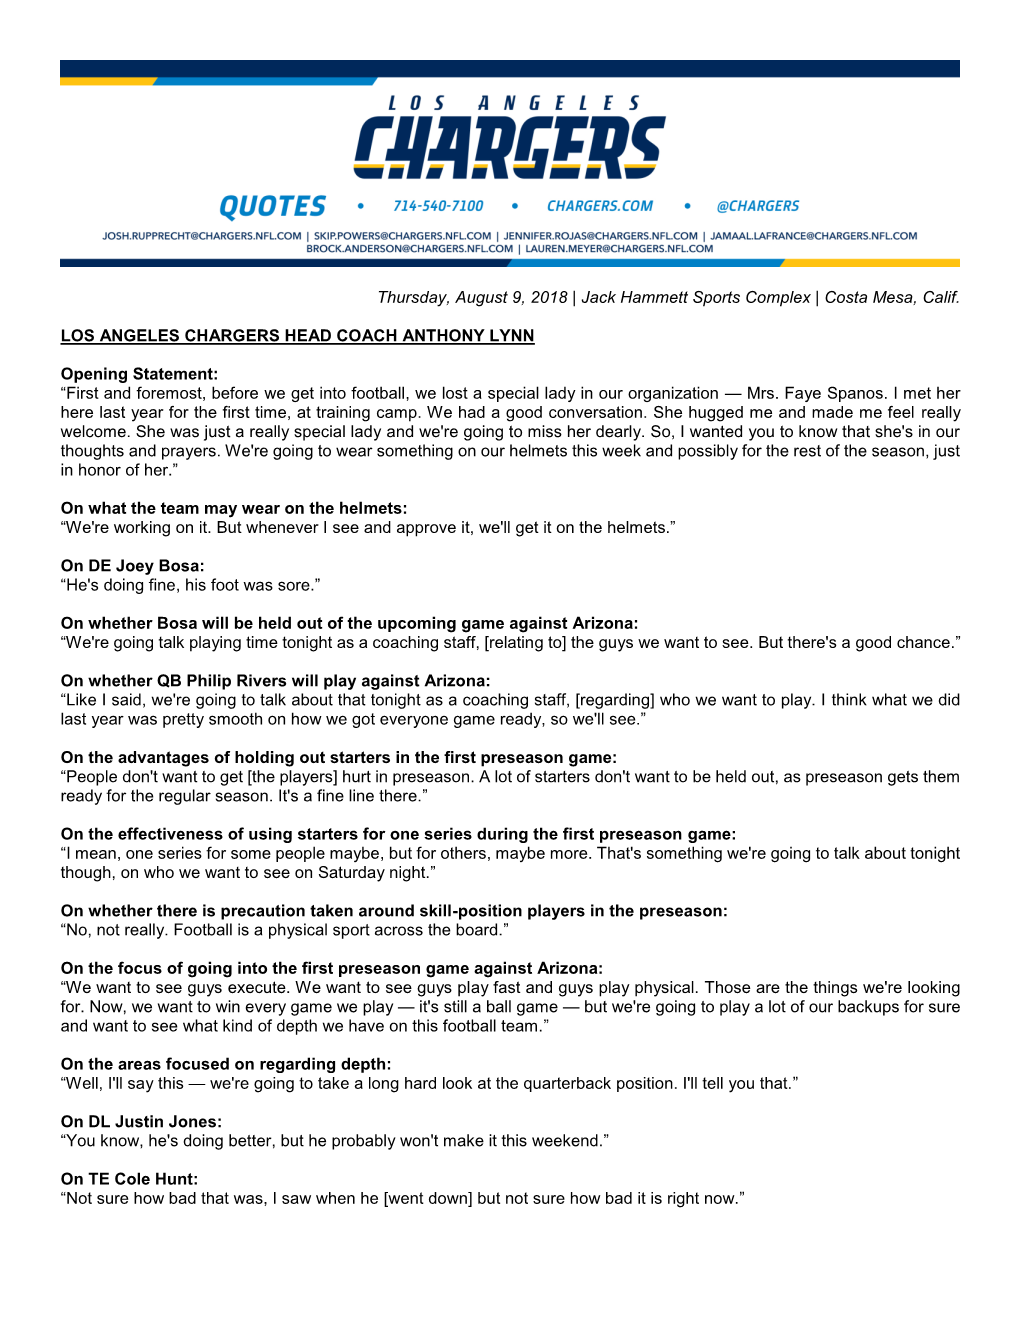 Thursday, August 9, 2018 | Jack Hammett Sports Complex | Costa Mesa, Calif. LOS ANGELES CHARGERS HEAD COACH ANTHONY LYNN Opening